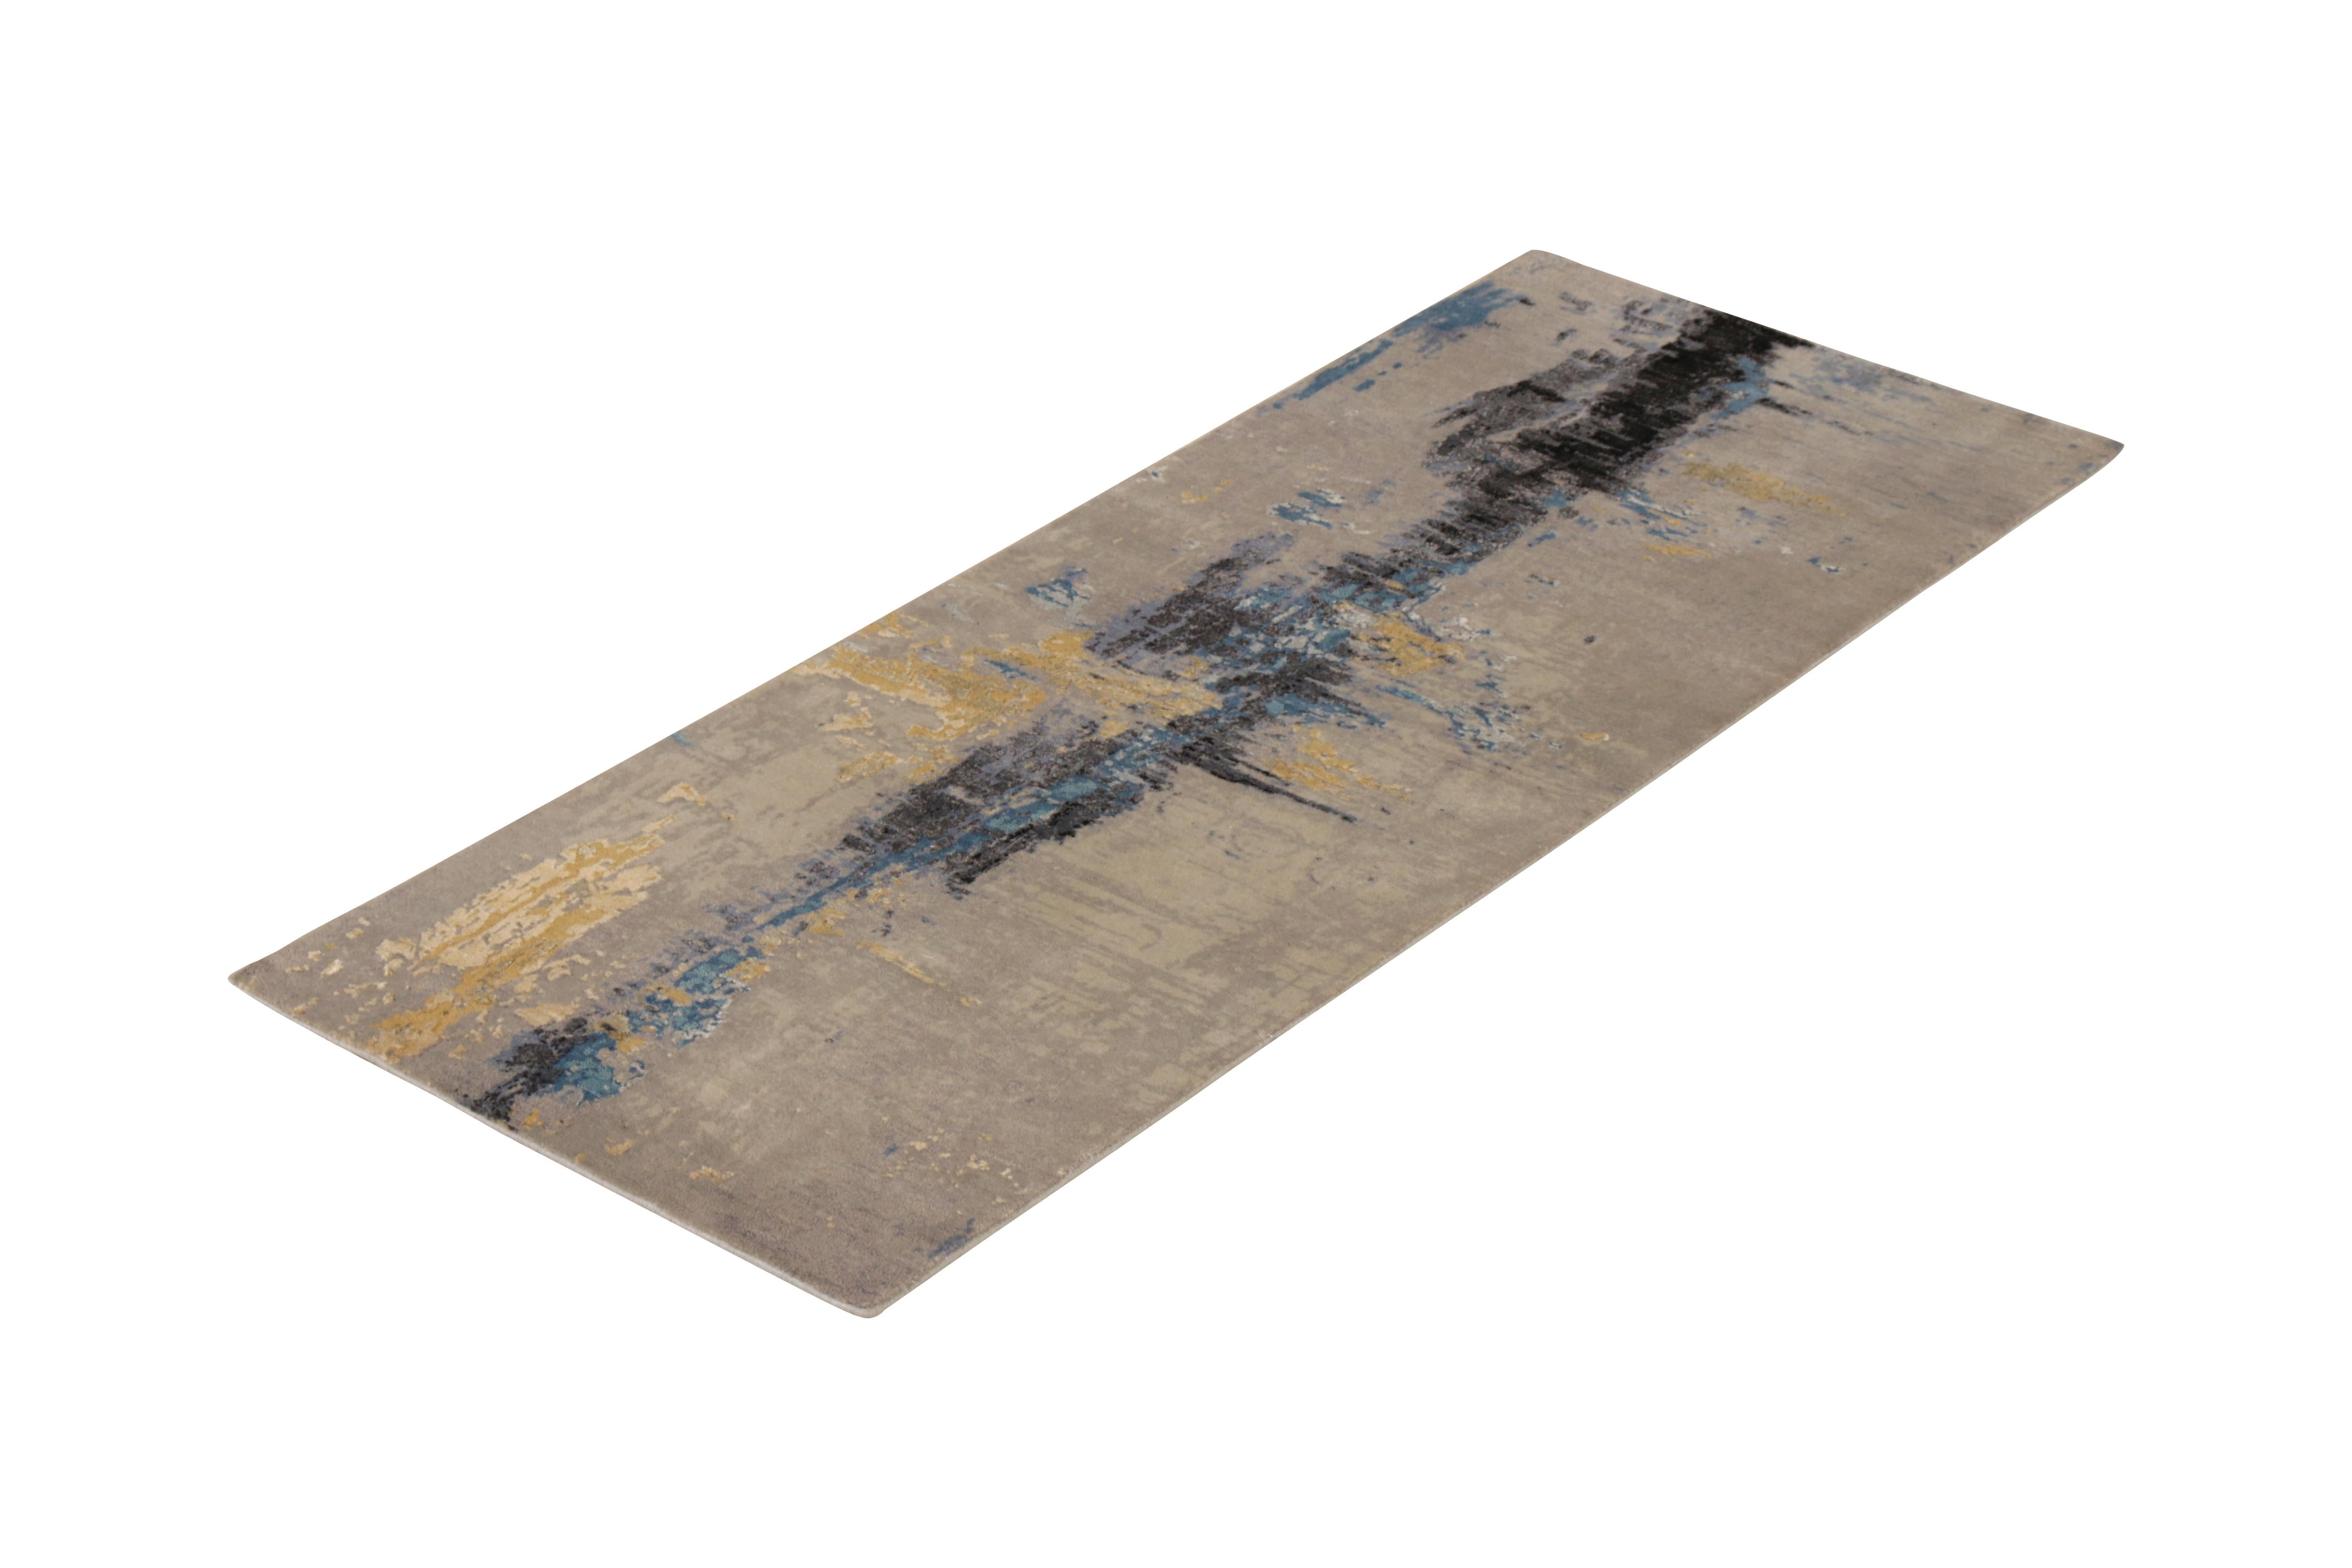 A new addition to the handmade rugs in the abstract rug line by Rug & Kilim, this 3 x 7 modern runner is hand knotted in a unique, proprietary blend of quality wool and silk, the natural luster of the latter bringing out transitional hues of gray,